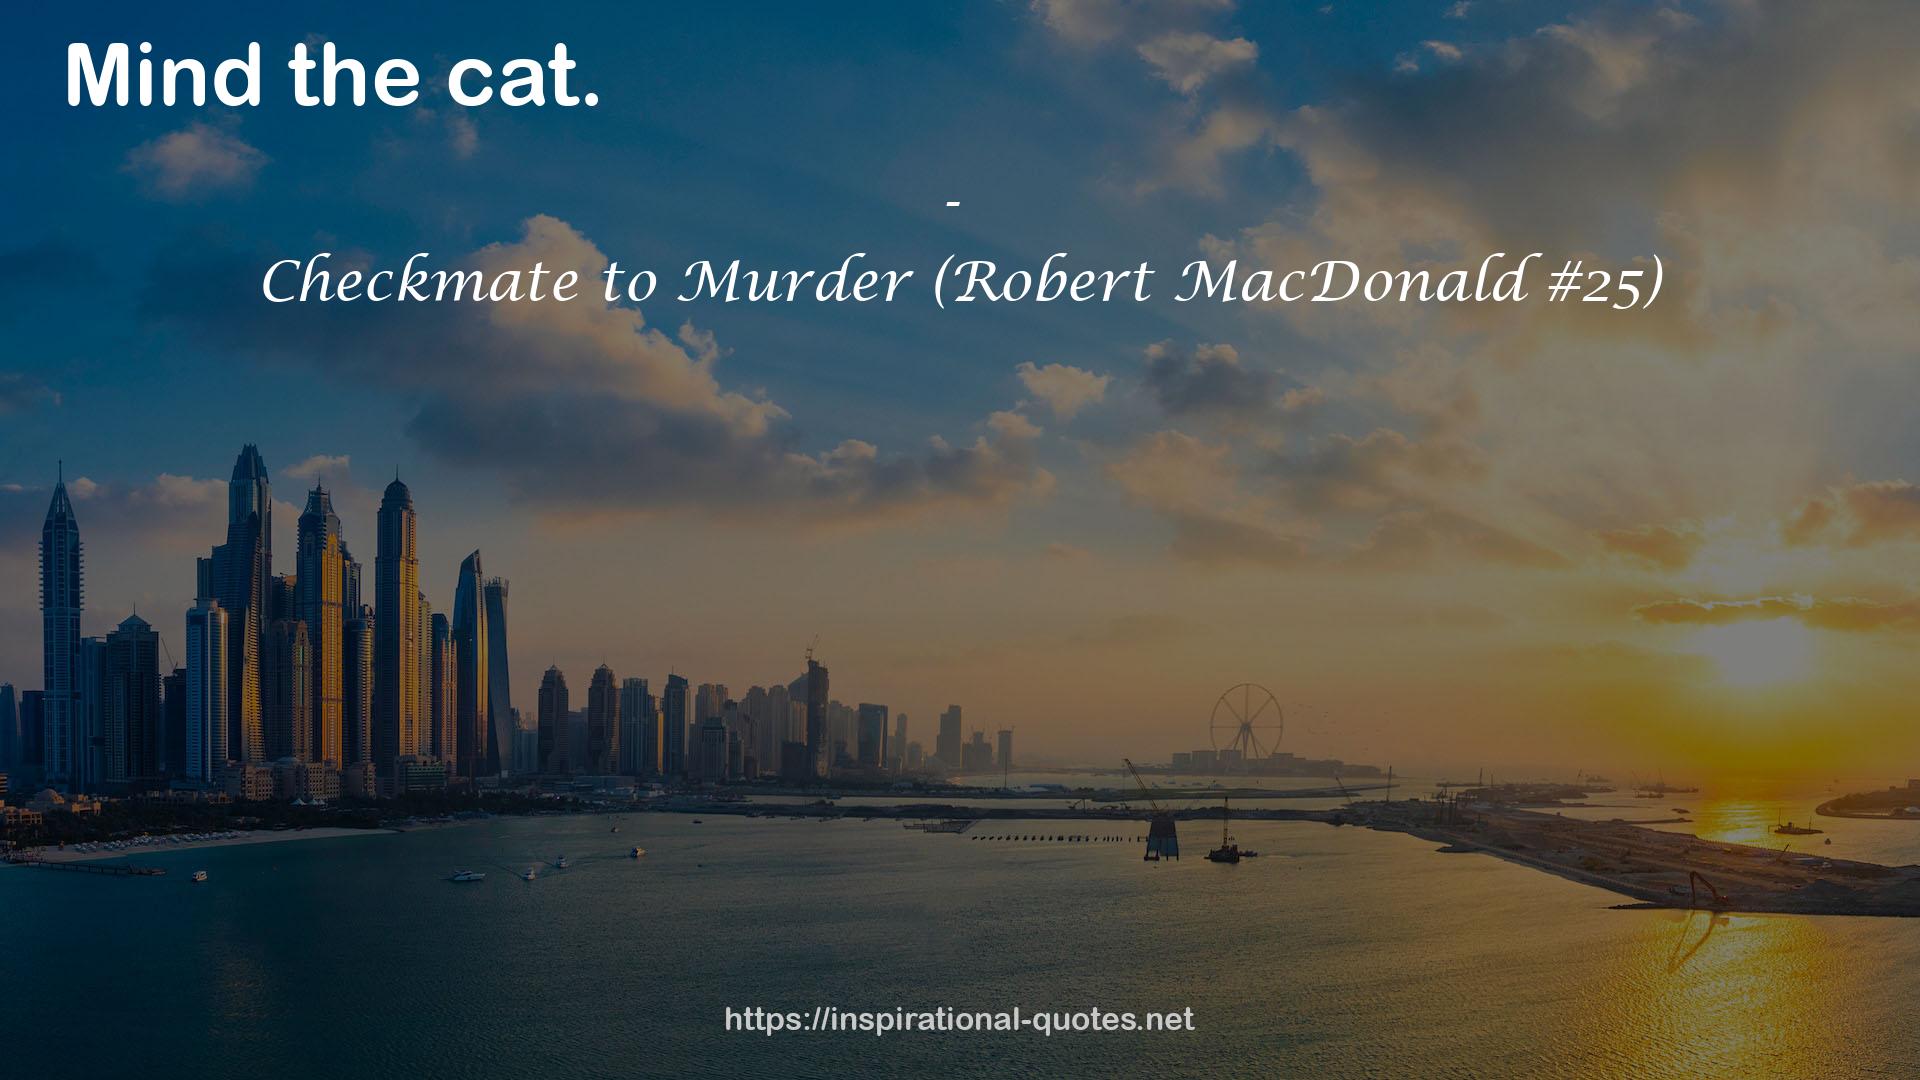 Checkmate to Murder (Robert MacDonald #25) QUOTES